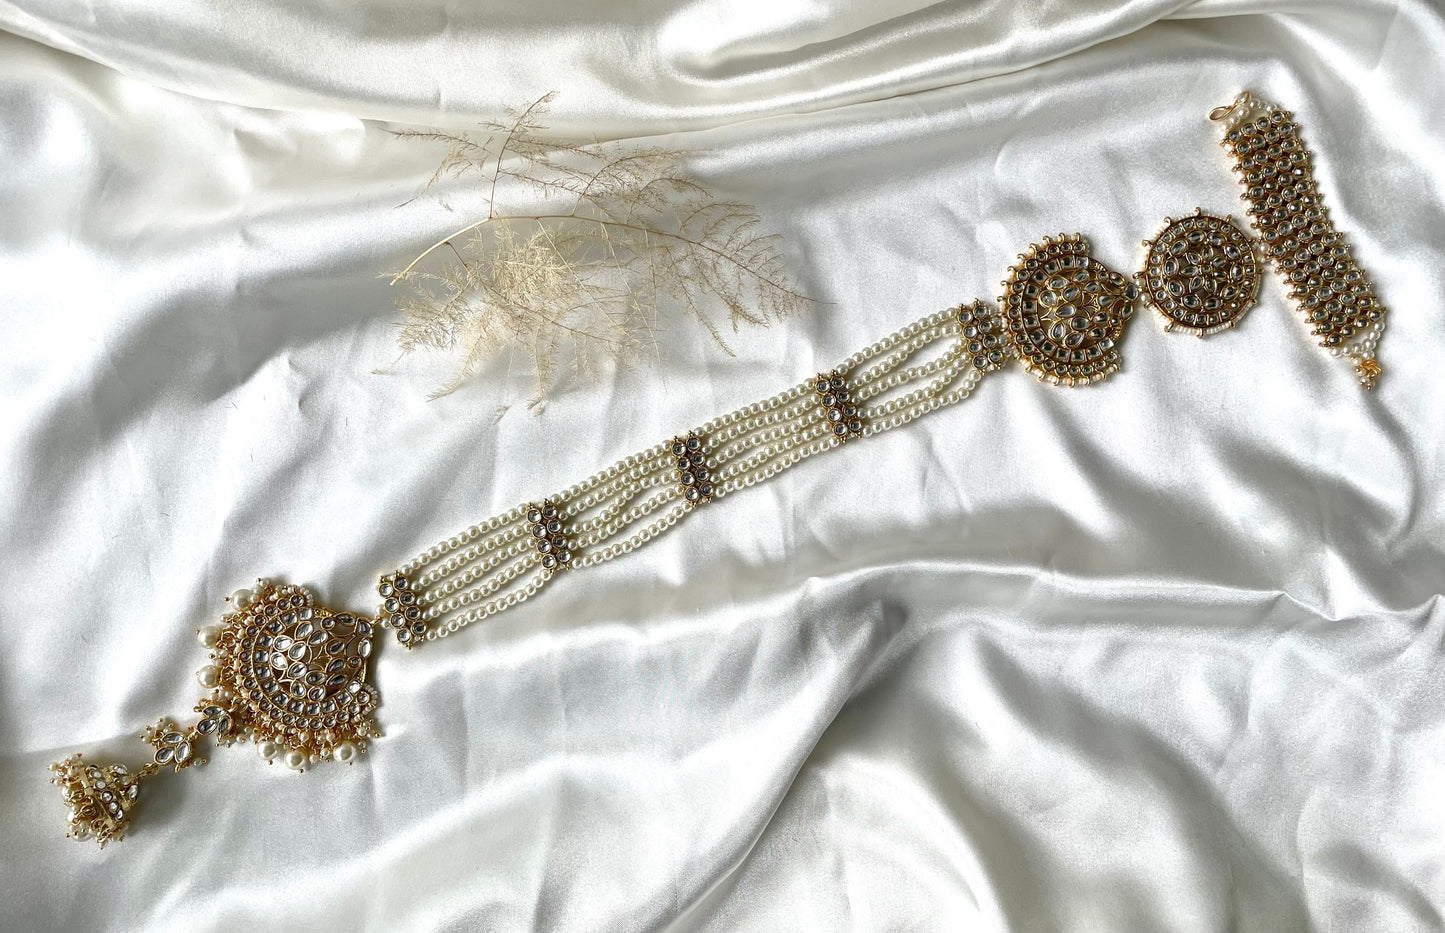 Gold and Pearl Braid Jewellery